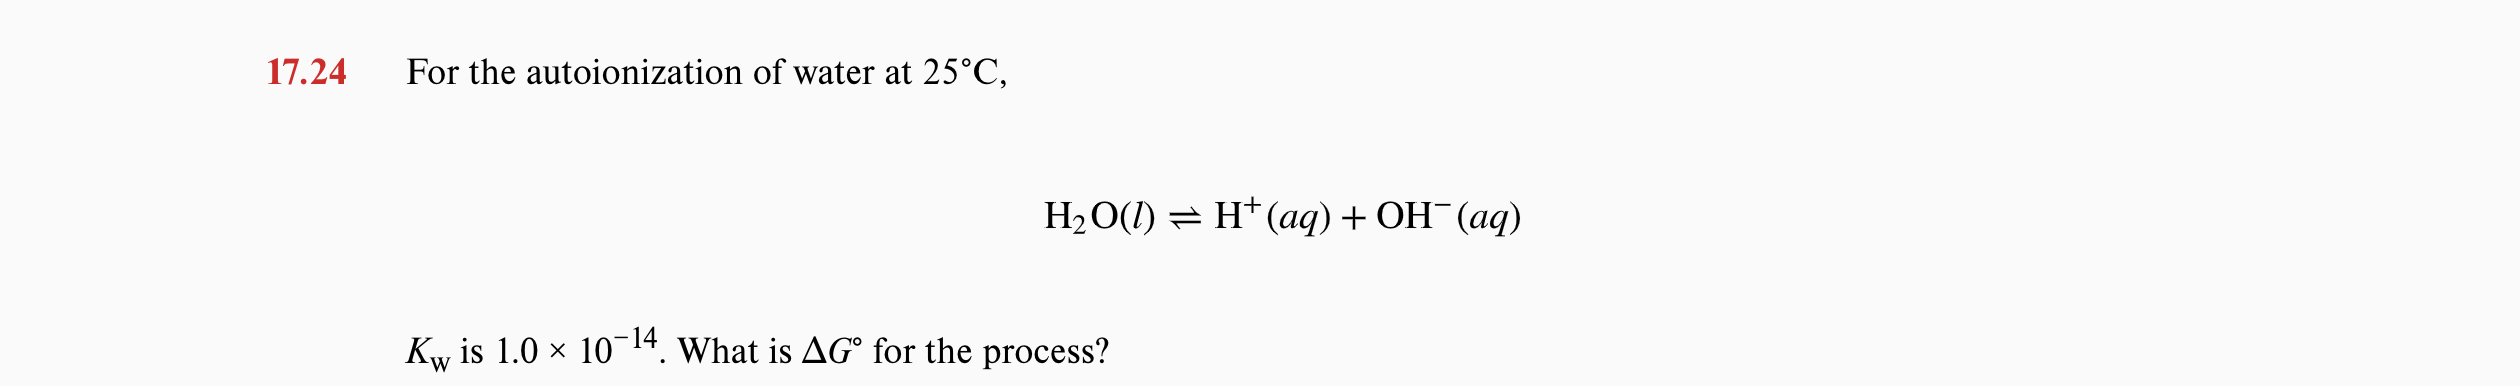 17.24
For the autoionization of water at 25°C,
H2O(1) = H* (aq) + OH (aq)
Kw is 1.0 x 1014. What is AG° for the process?
